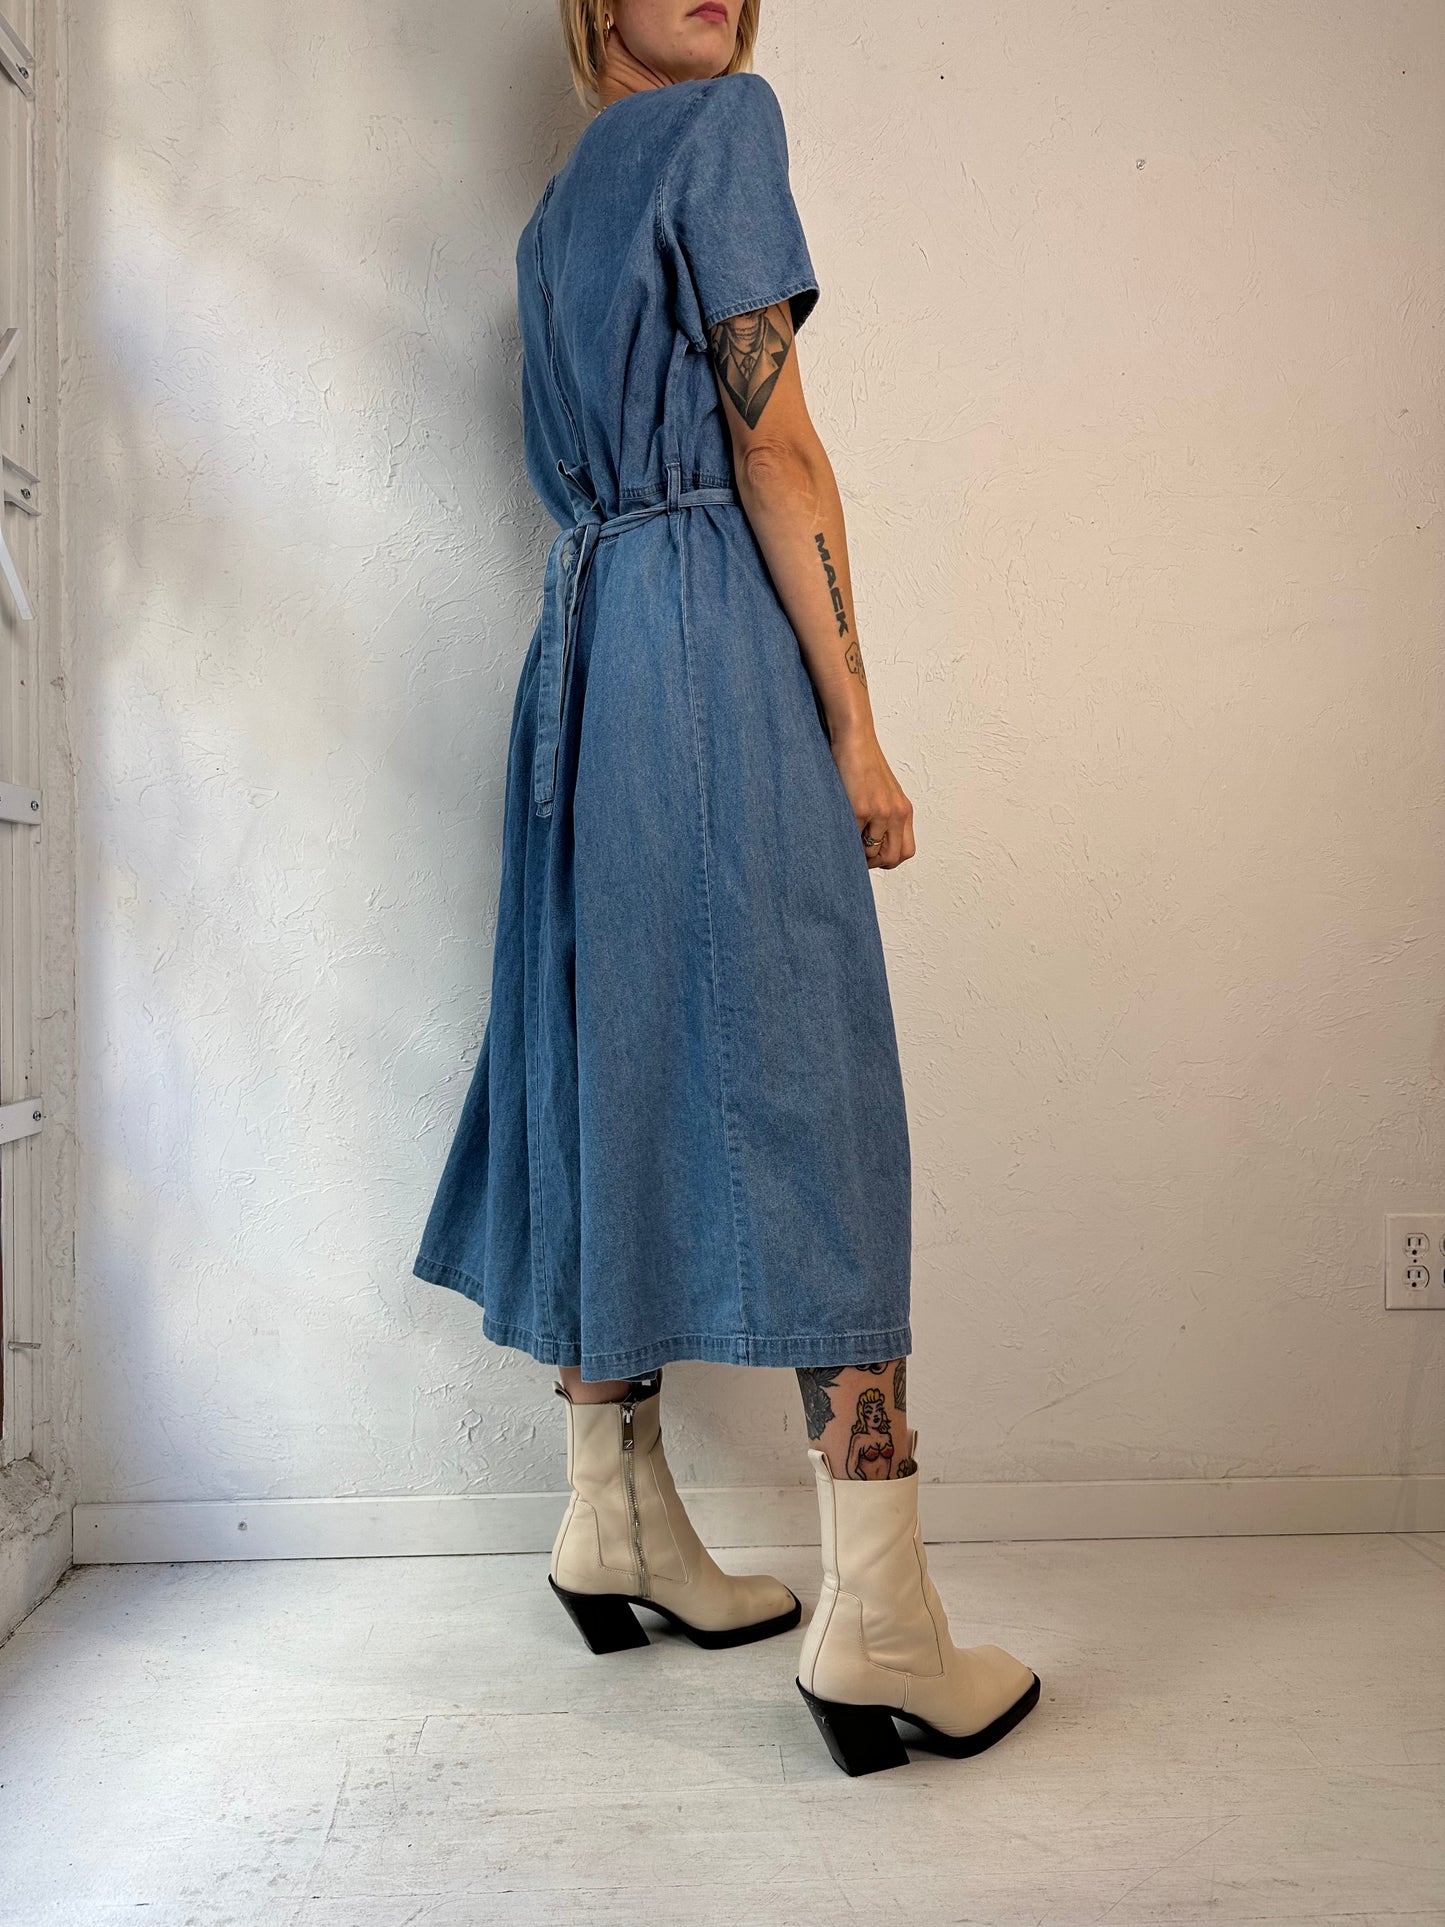 Y2k 'Traditions' Embroidered Denim Dress / Large